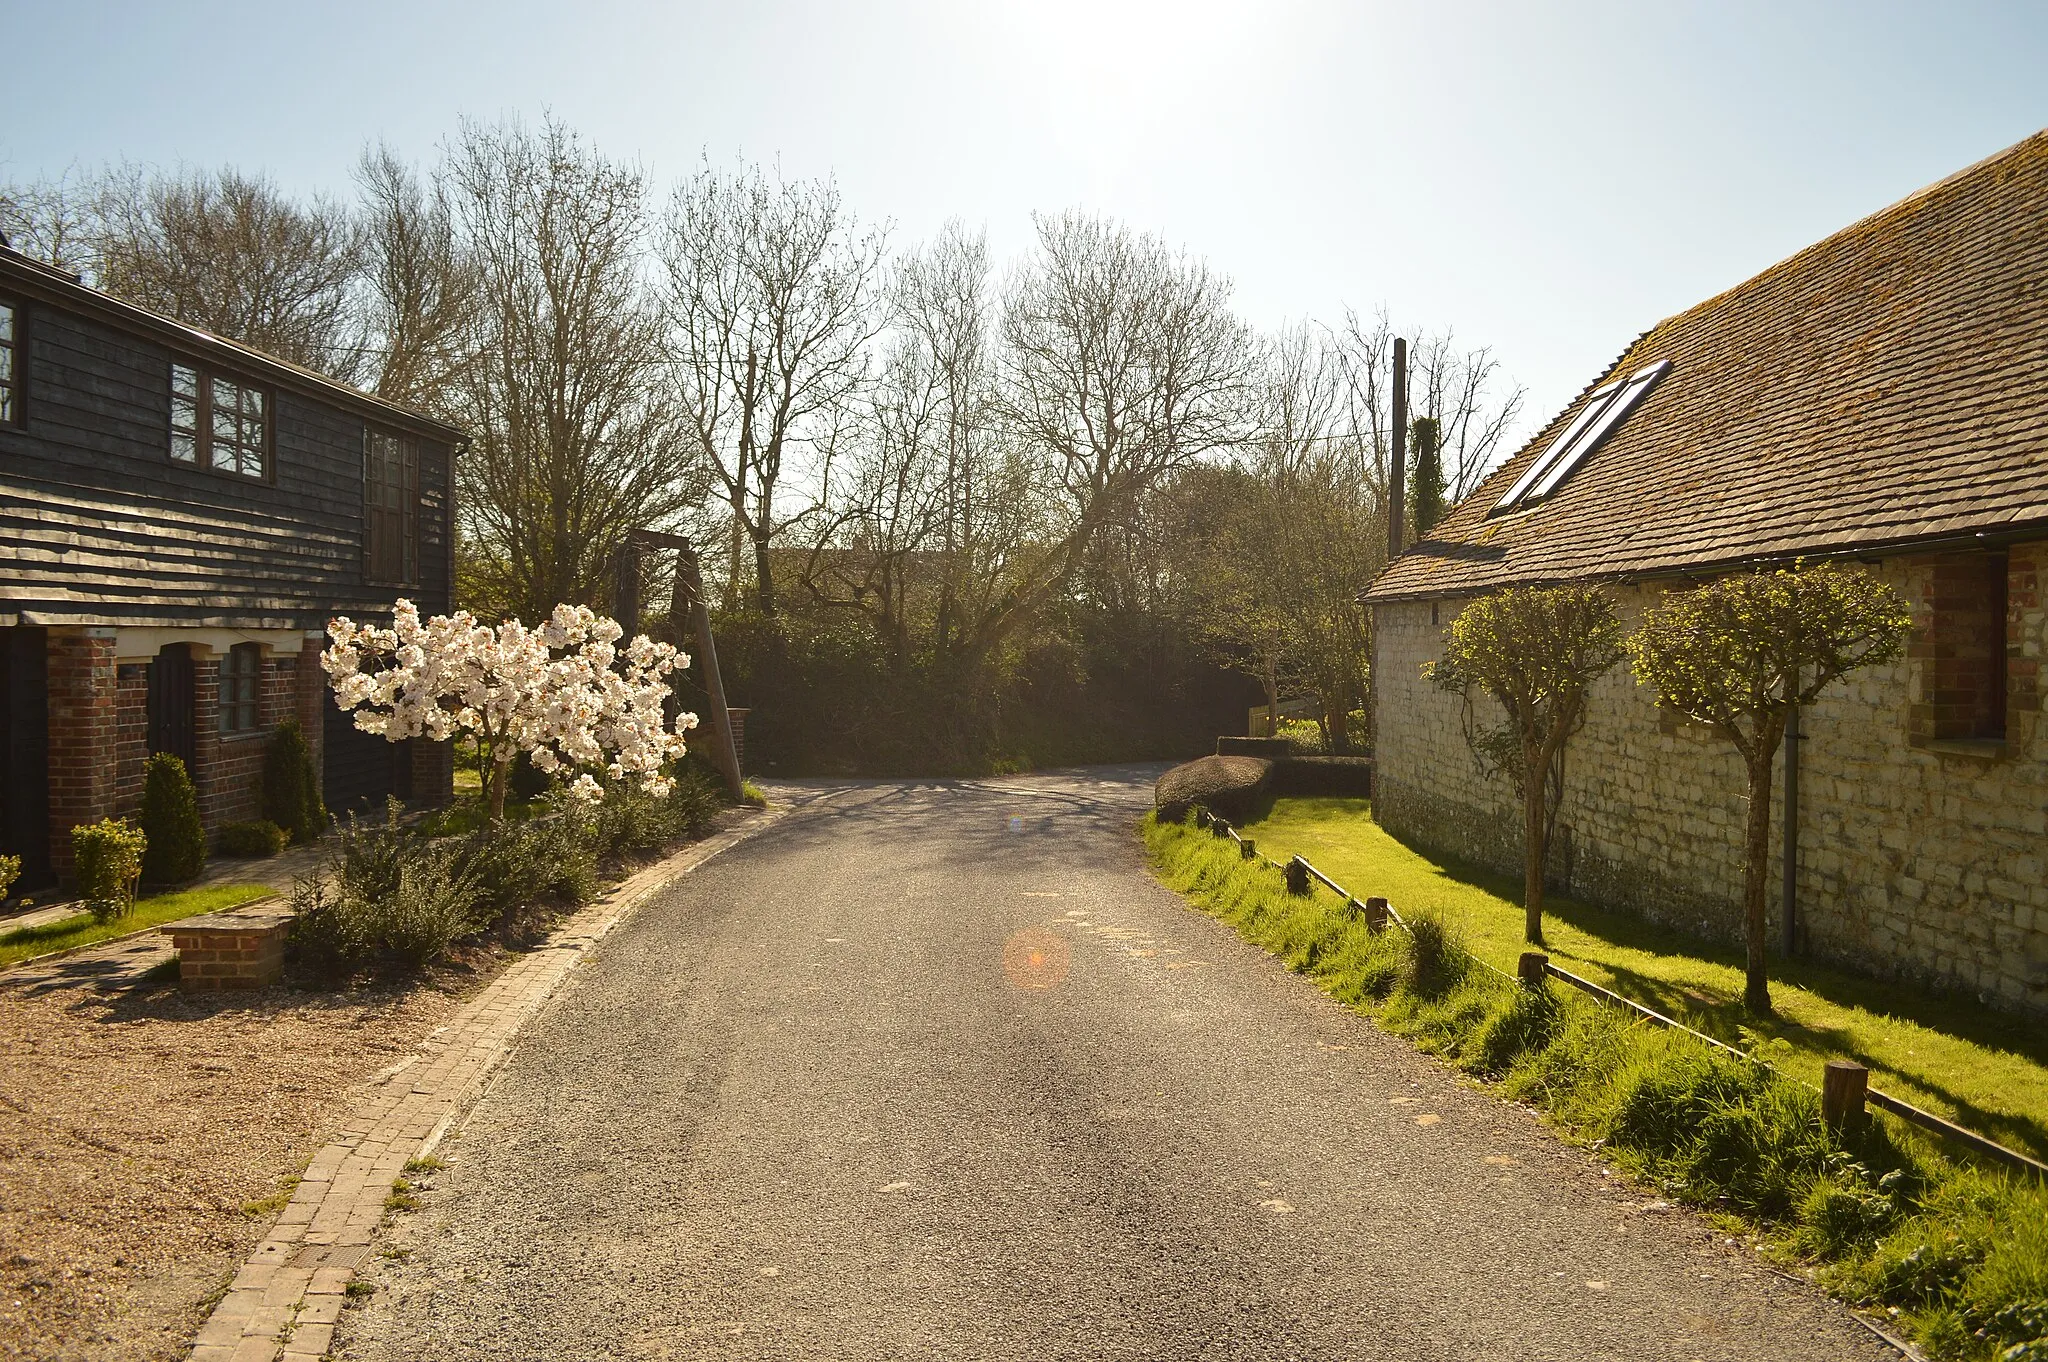 Photo showing: Housing in the village of Weston near Petersfield in Hampshire